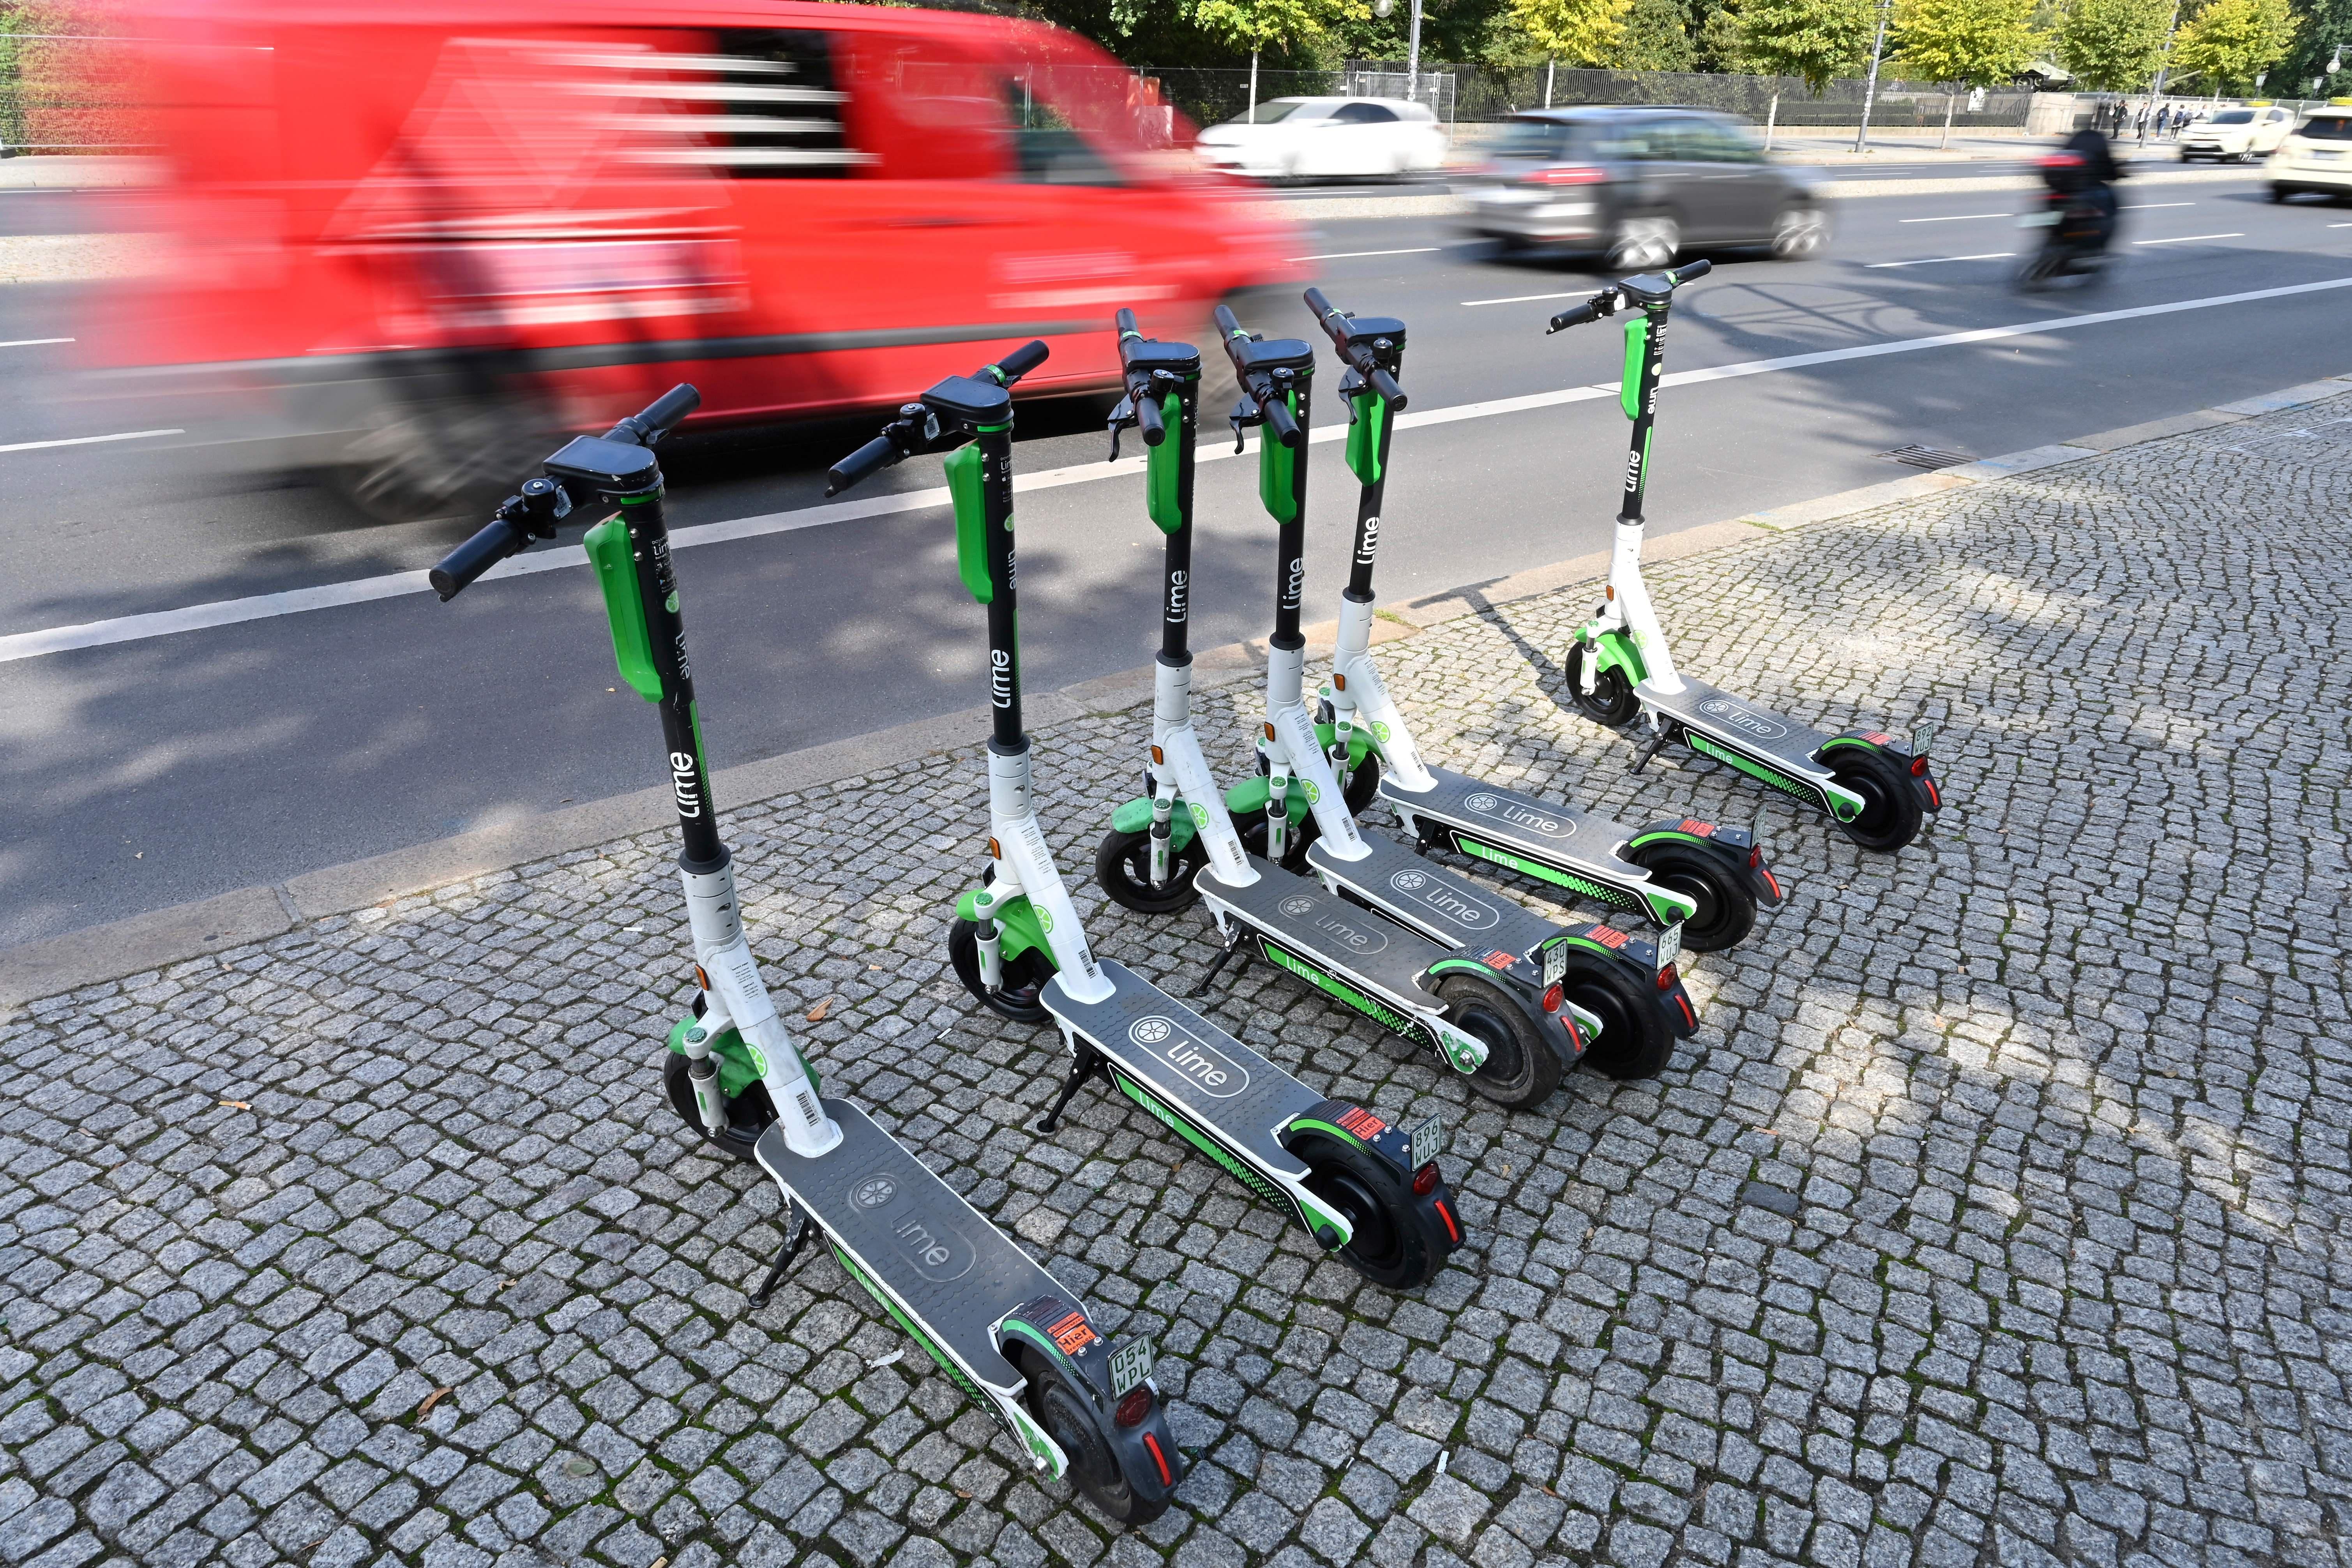 A row of e-scooters on a Berlin sidewalk on Sept. 13, 2019.